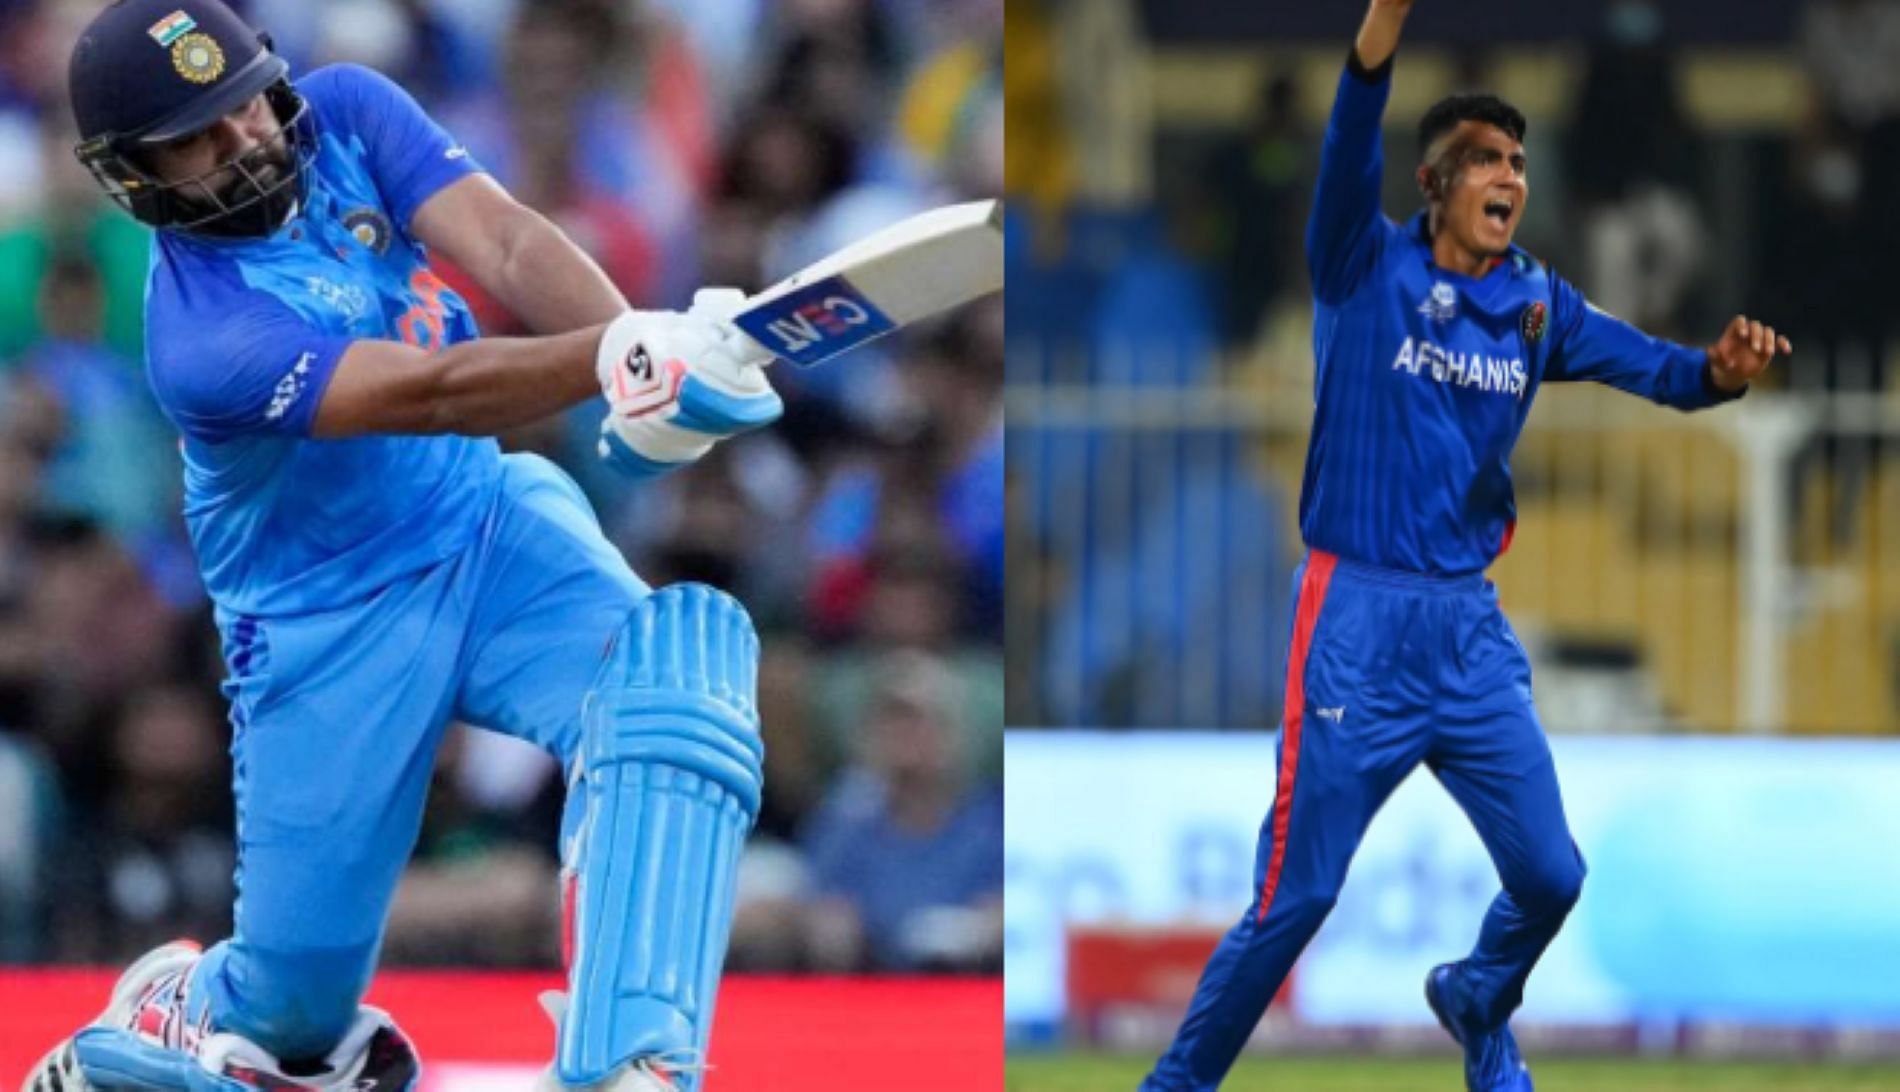 The battle between the Indian batter and Afghan spinners could be worth watching